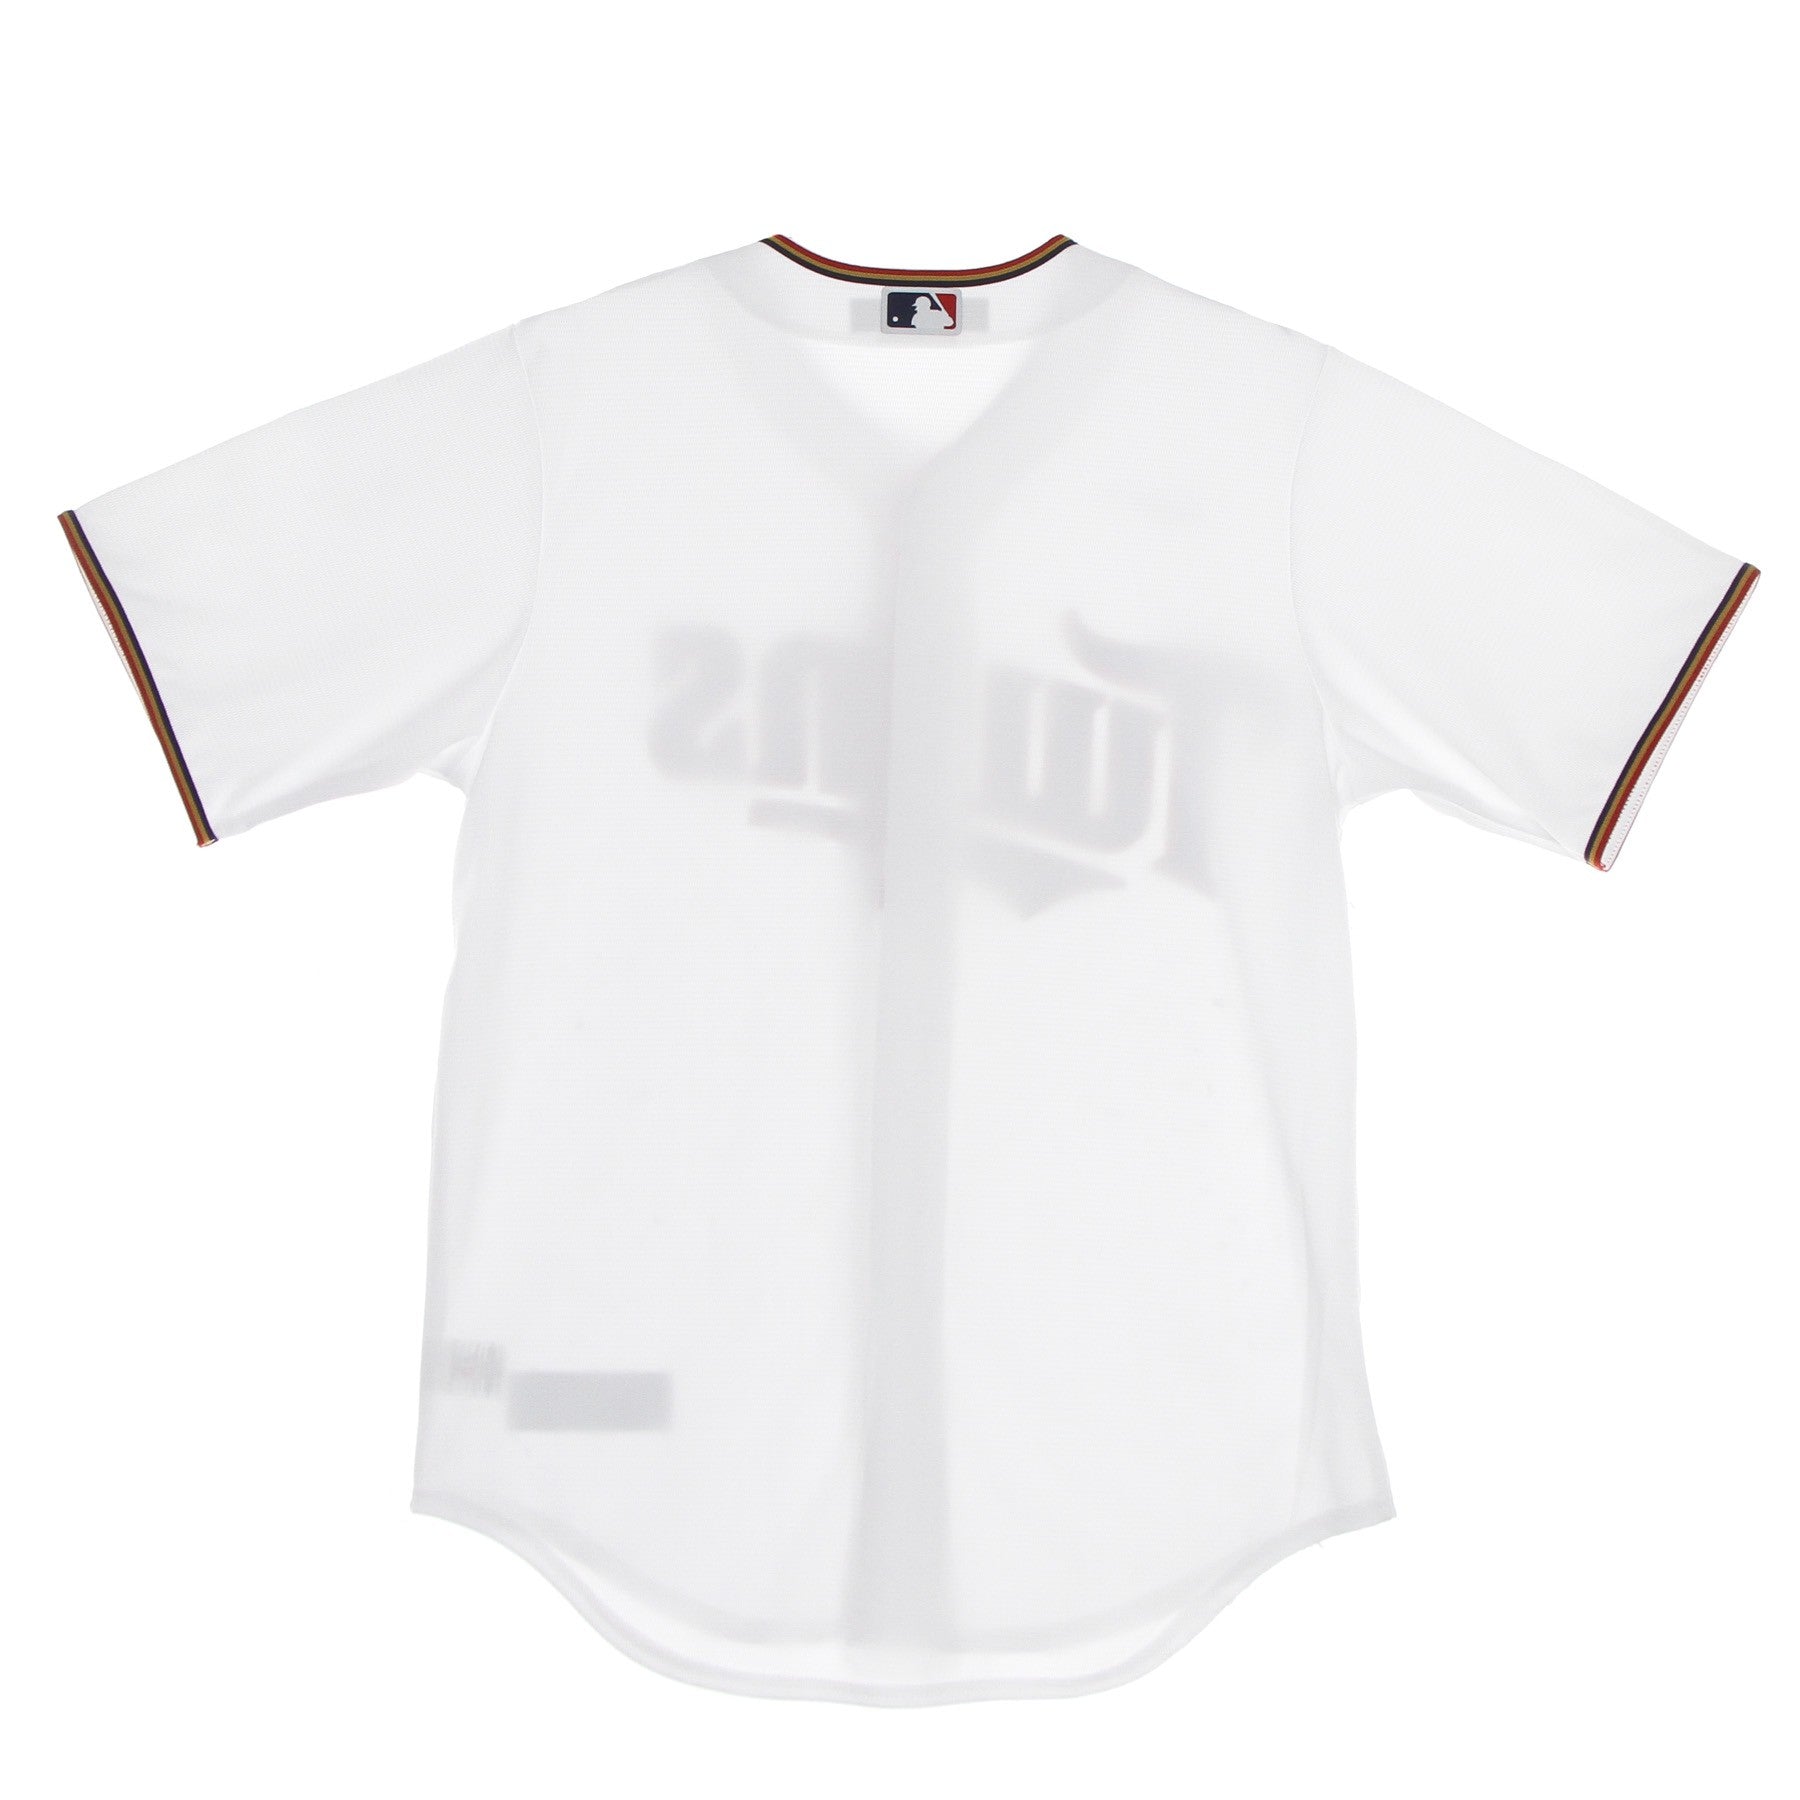 Men's MLB Official Replica Jersey Mintwi Home Baseball Jacket